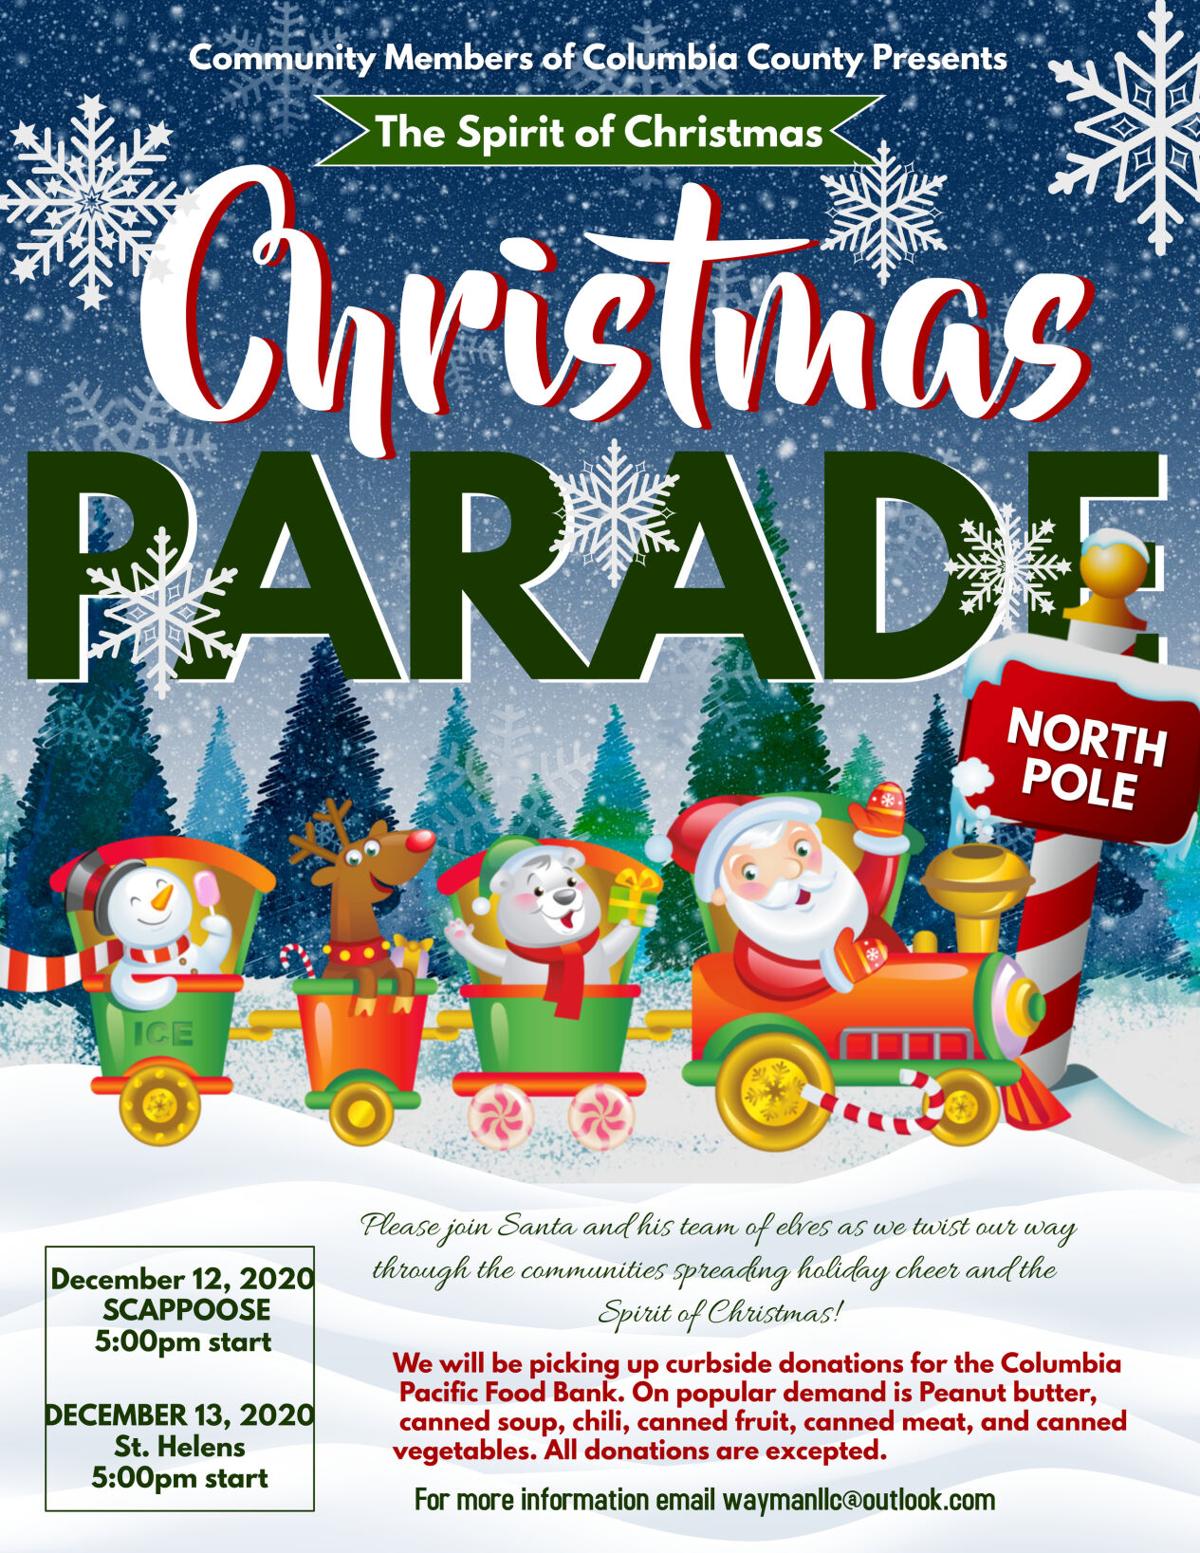 Christmas: Local parades planned to spread holiday spirit, boost hope ...